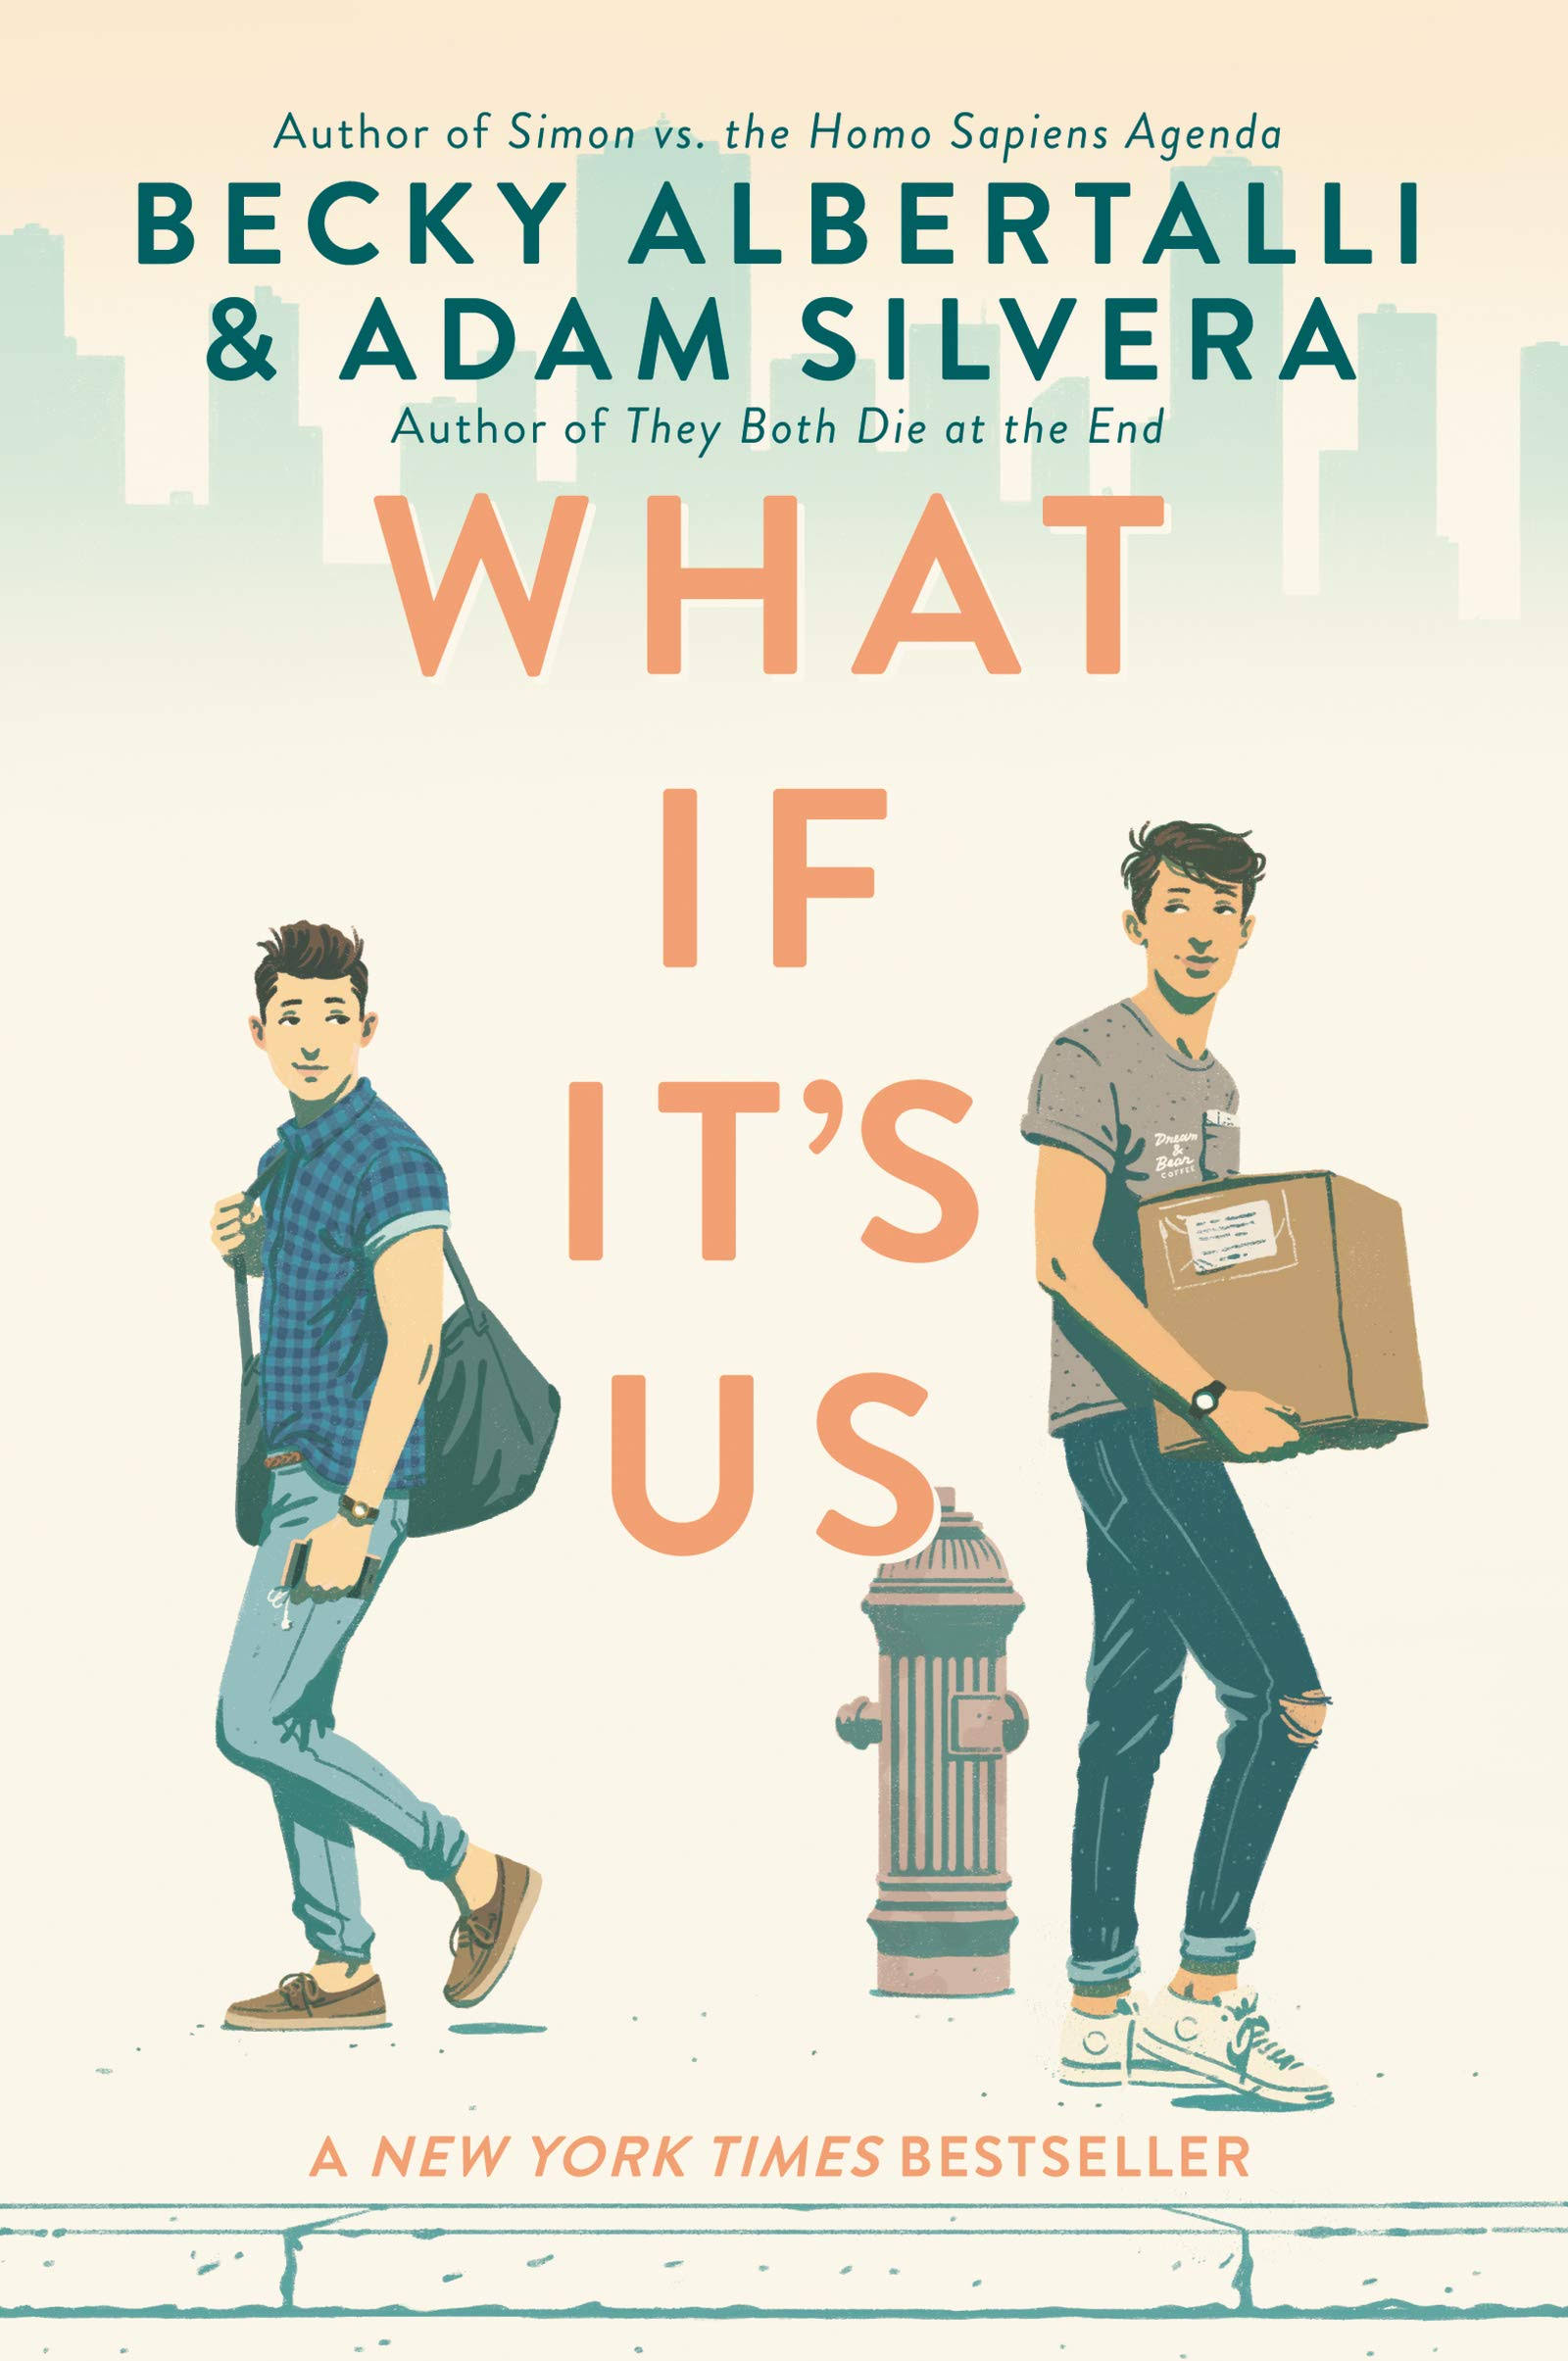 What If It's Us by Becky Albertalli